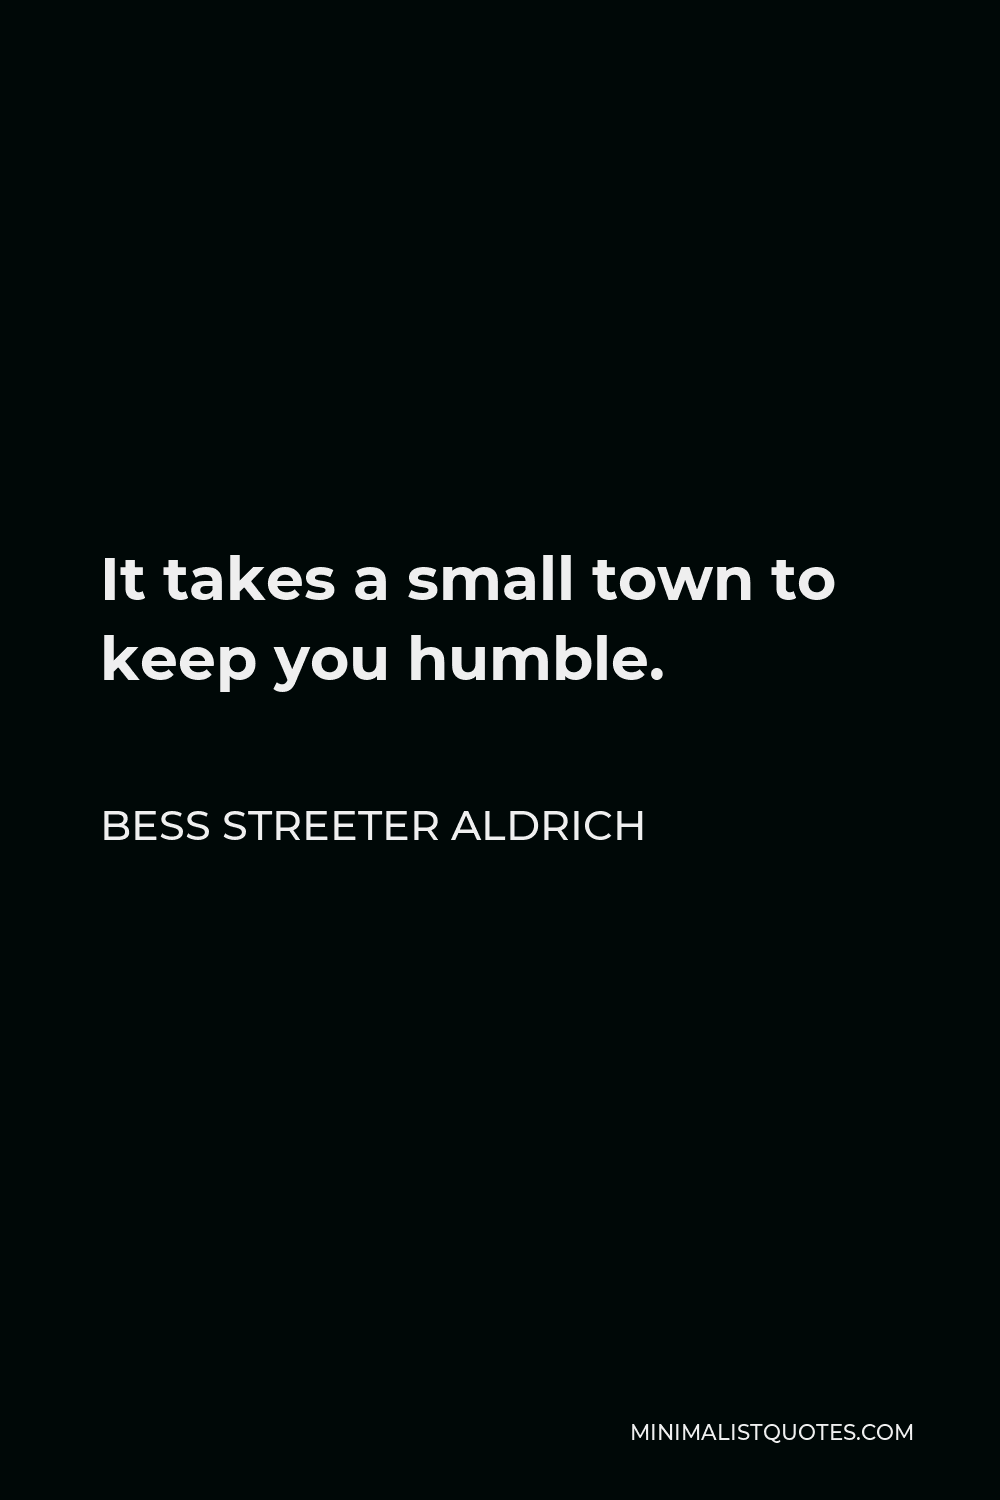 Bess Streeter Aldrich Quote - It takes a small town to keep you humble.